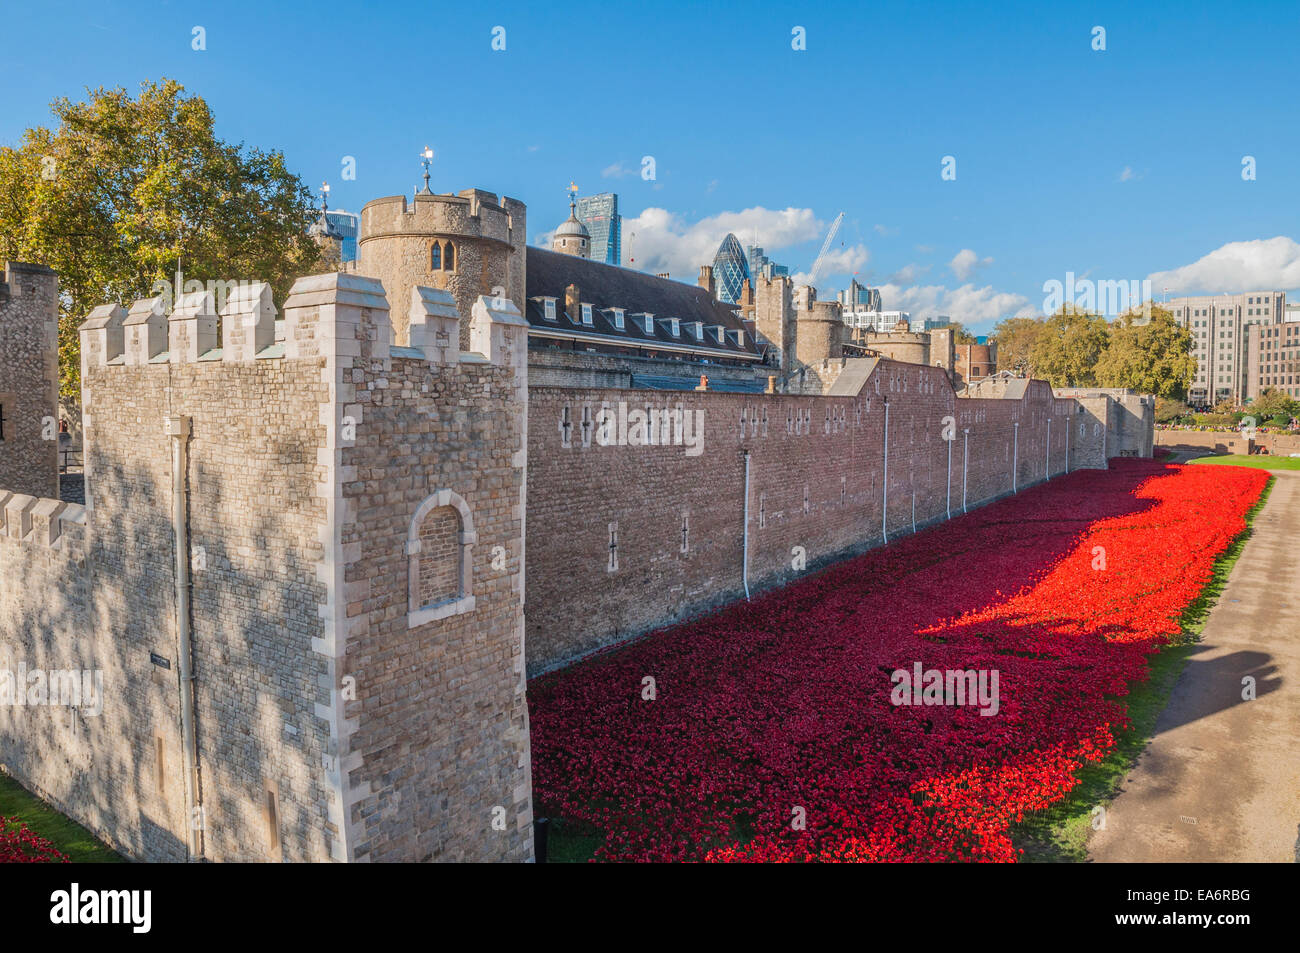 Blood swept lands and seas of red is an art installation by Paul Cummins commemorating the centenary of the outbreak of World War I PHILLIP ROBERTS Stock Photo